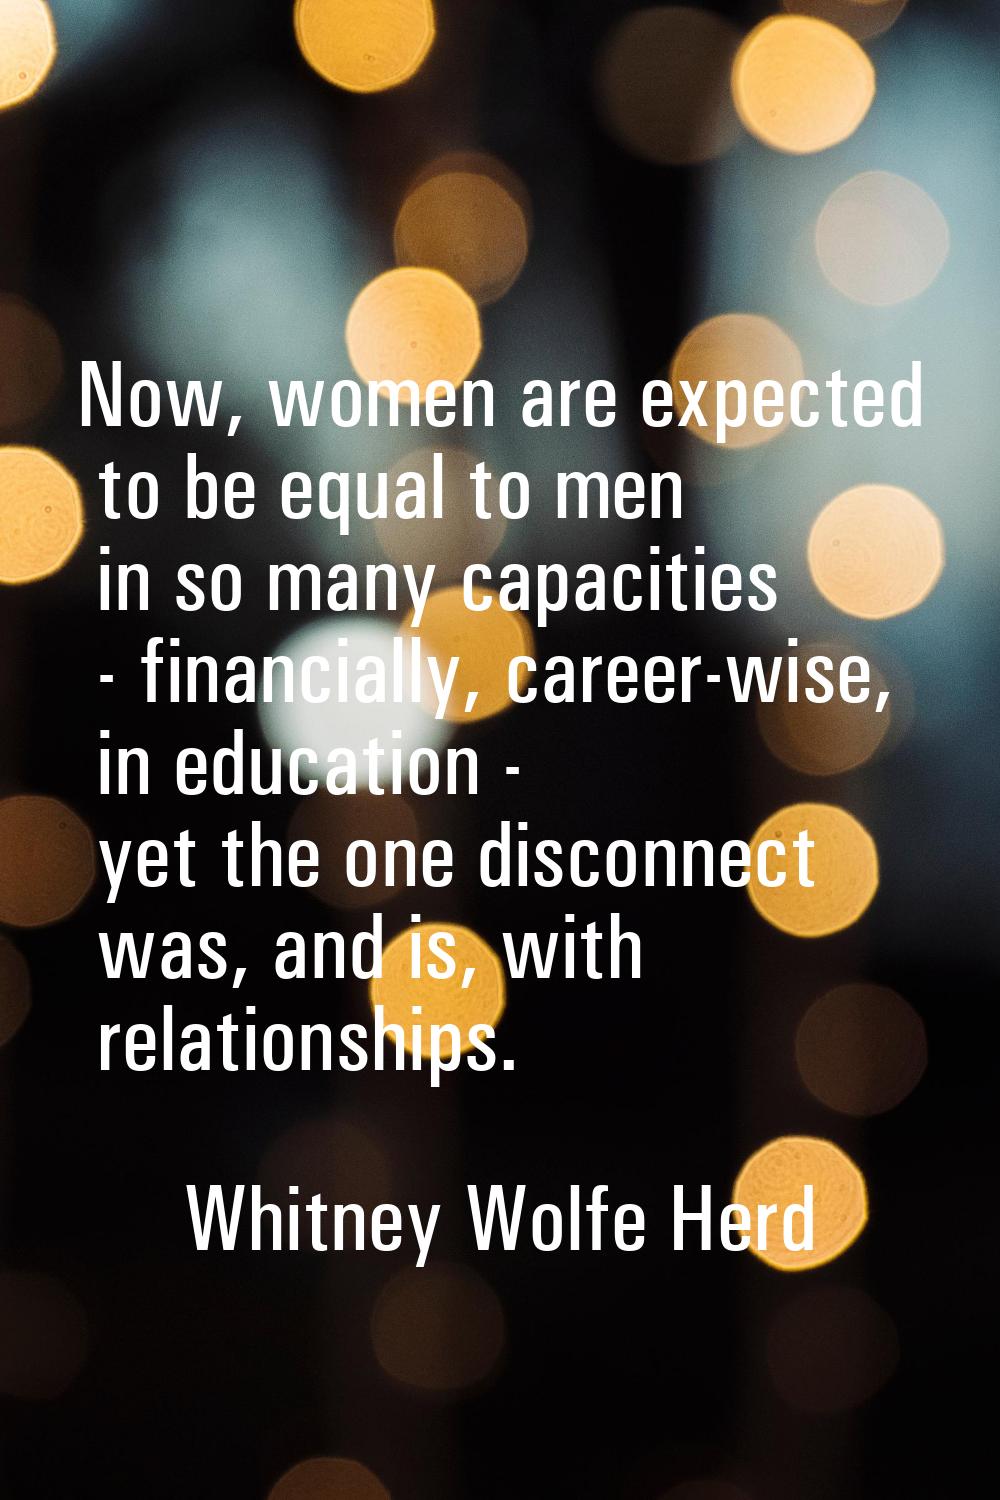 Now, women are expected to be equal to men in so many capacities - financially, career-wise, in edu